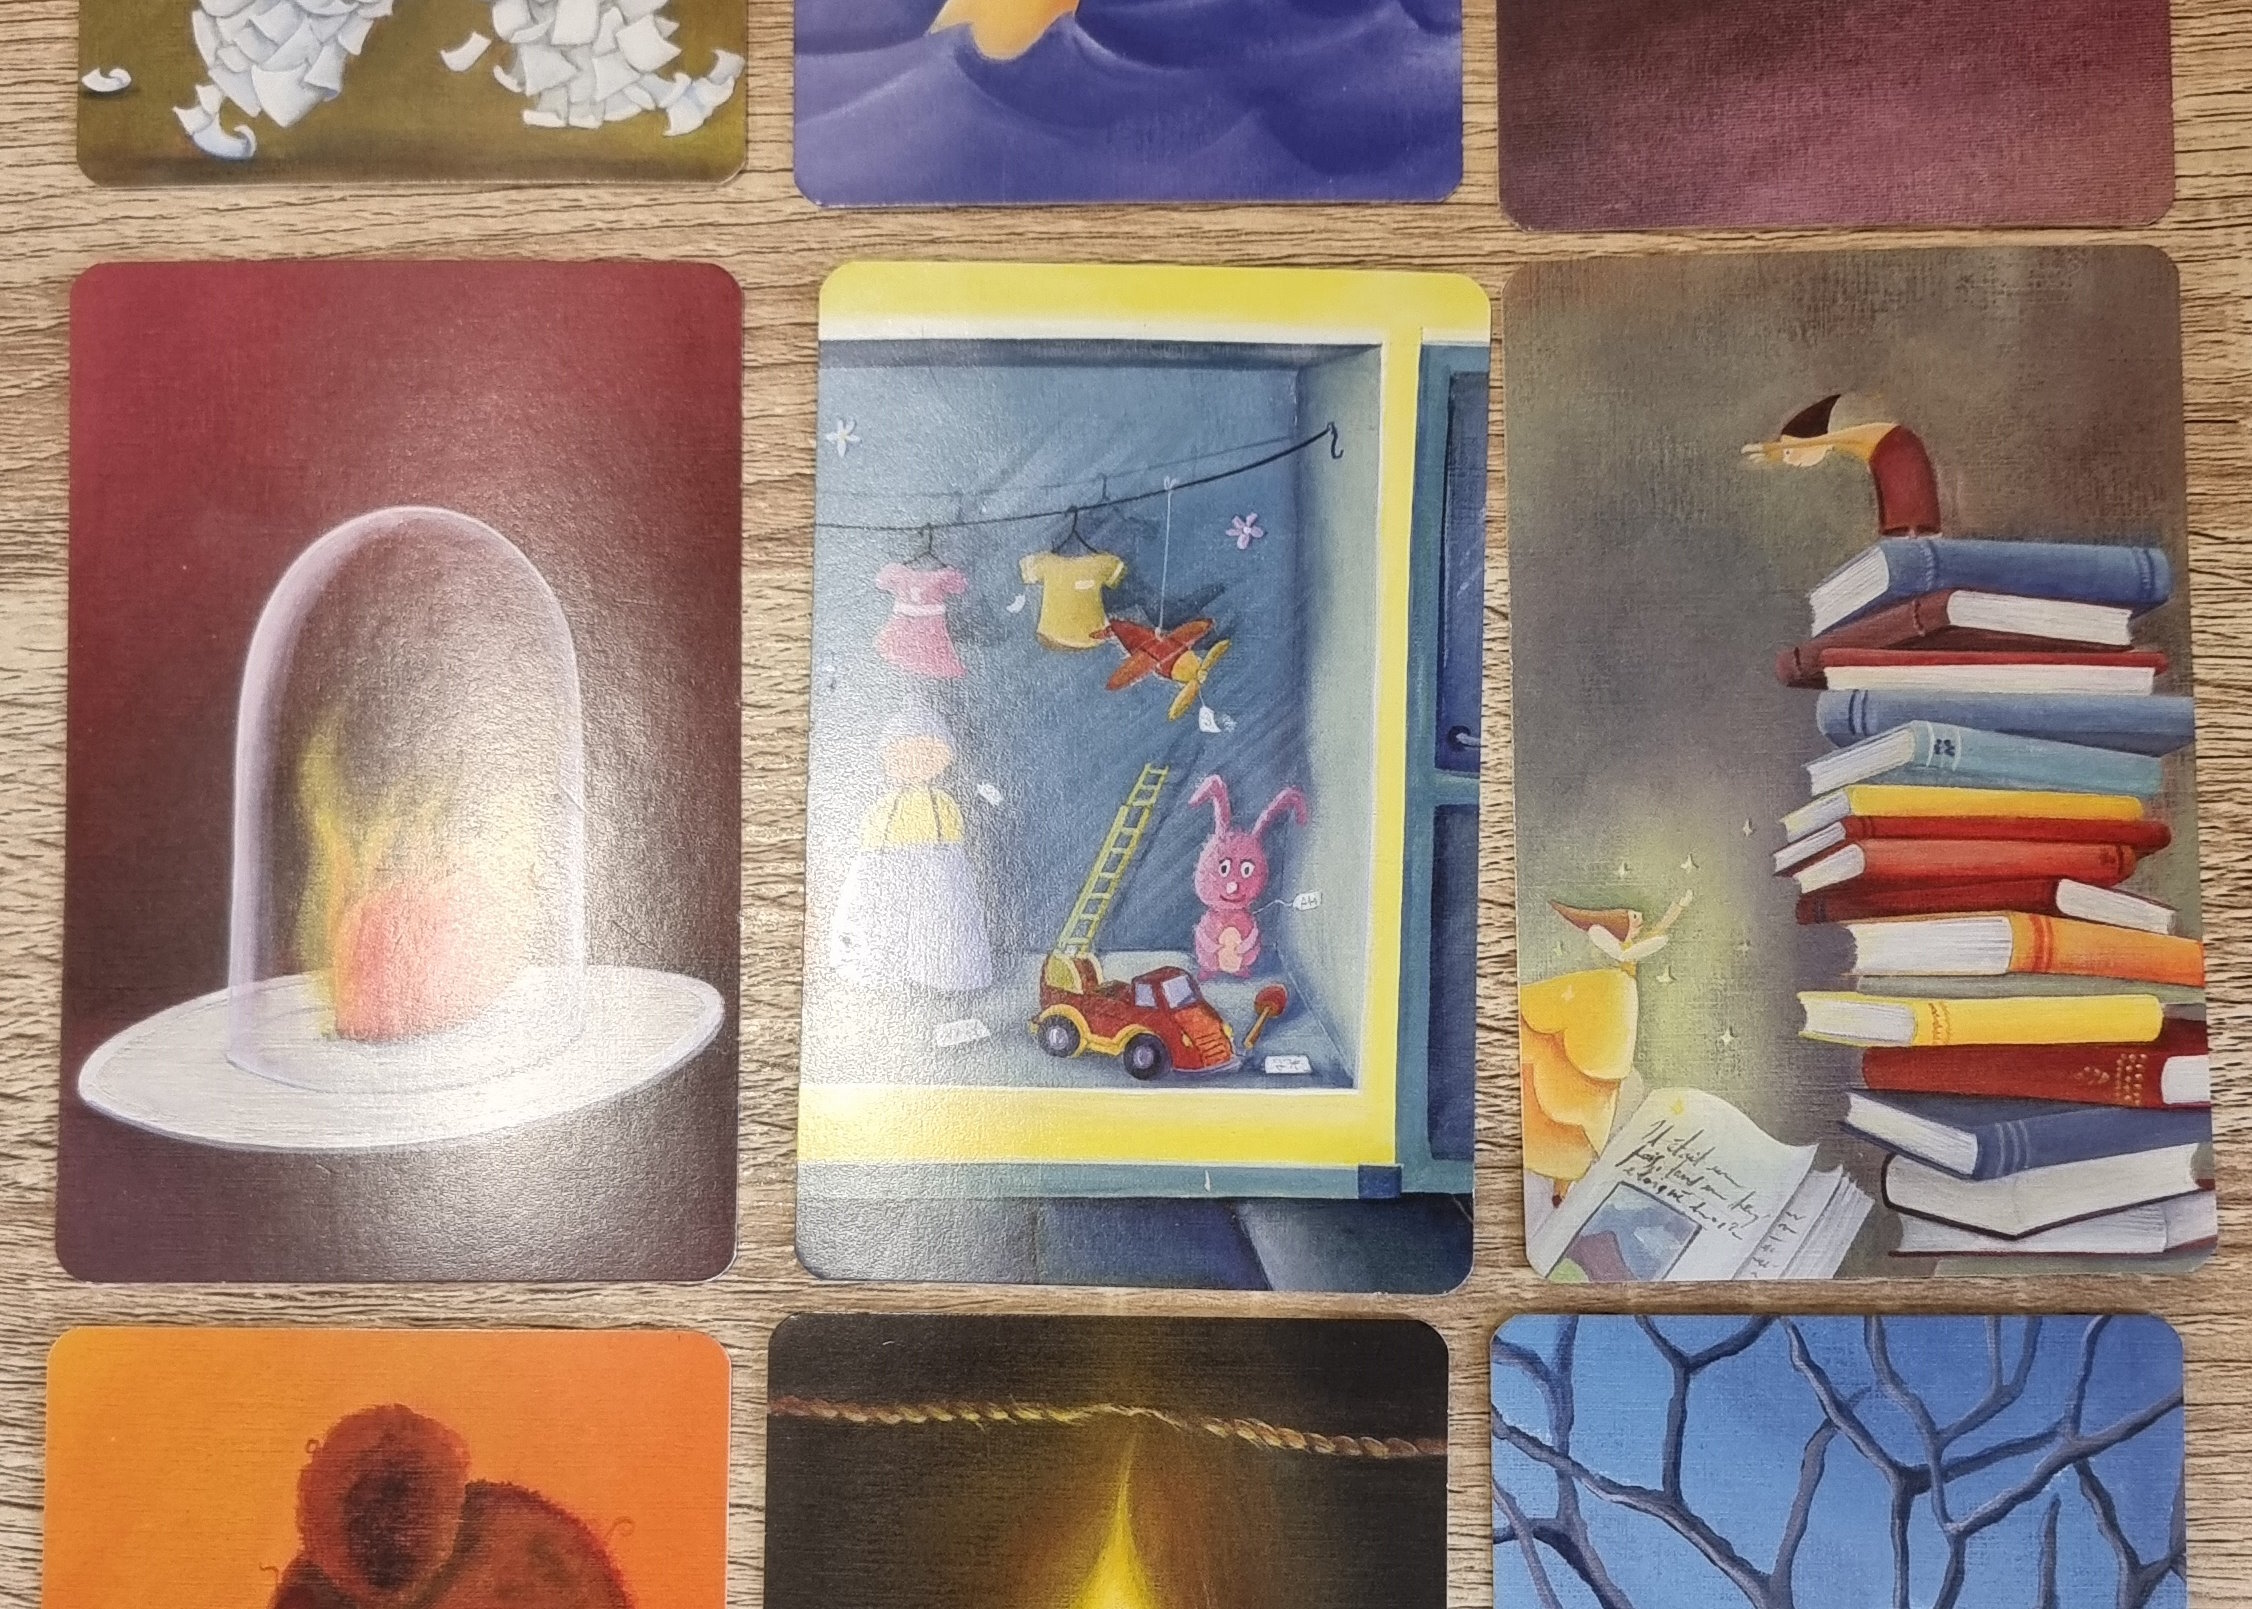 A trio of Dixit cards within a grid of nine. From left to right, they show: a heart, on fire, beneath a glass jar; a cubbyhole containing childrens' toys; a fairy leaping from a book towards a small person atop a stack of books.